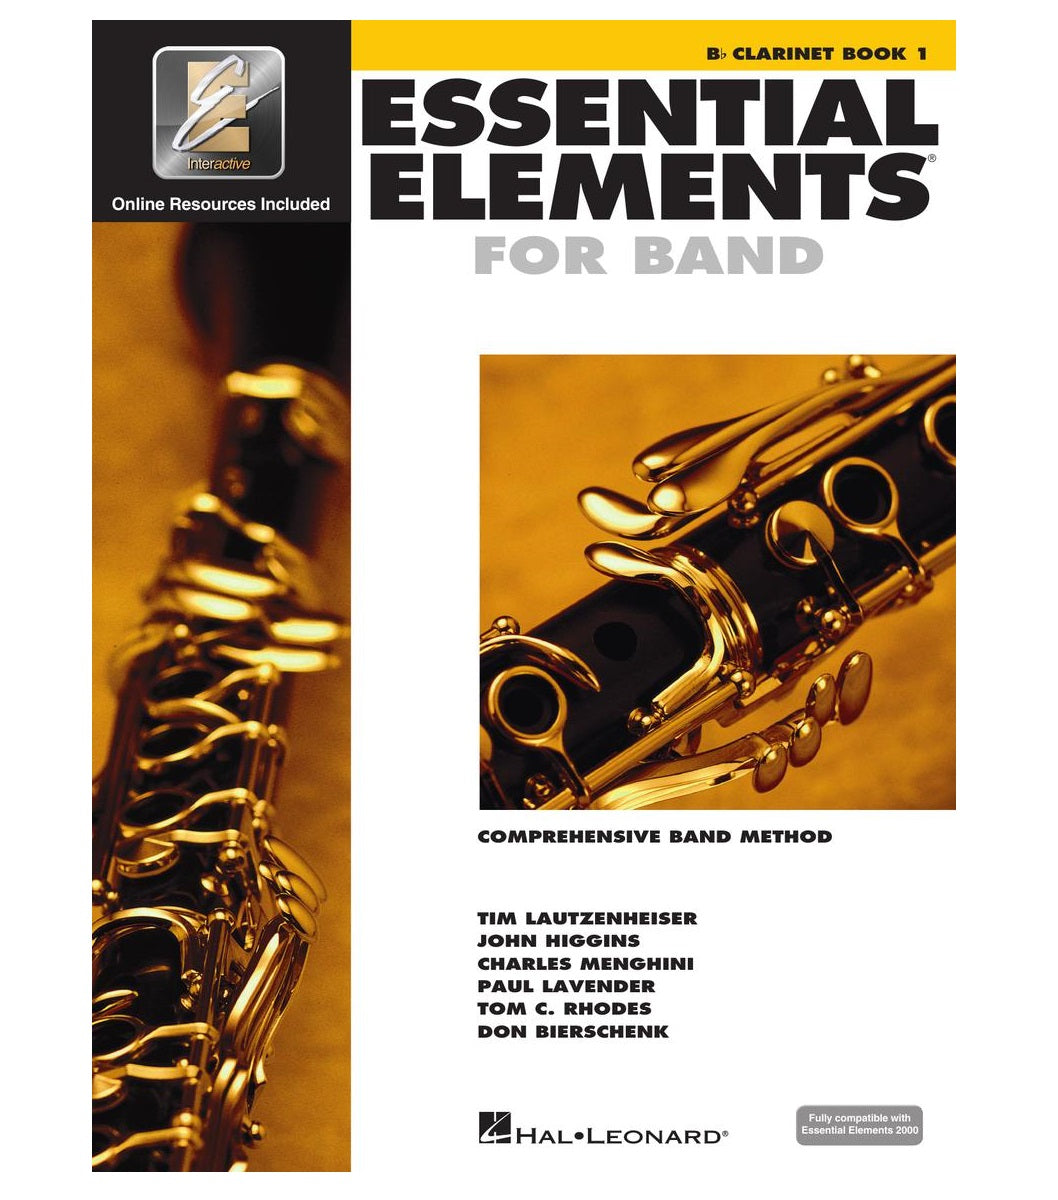 Essential Elements for Band - Available for All Instruments